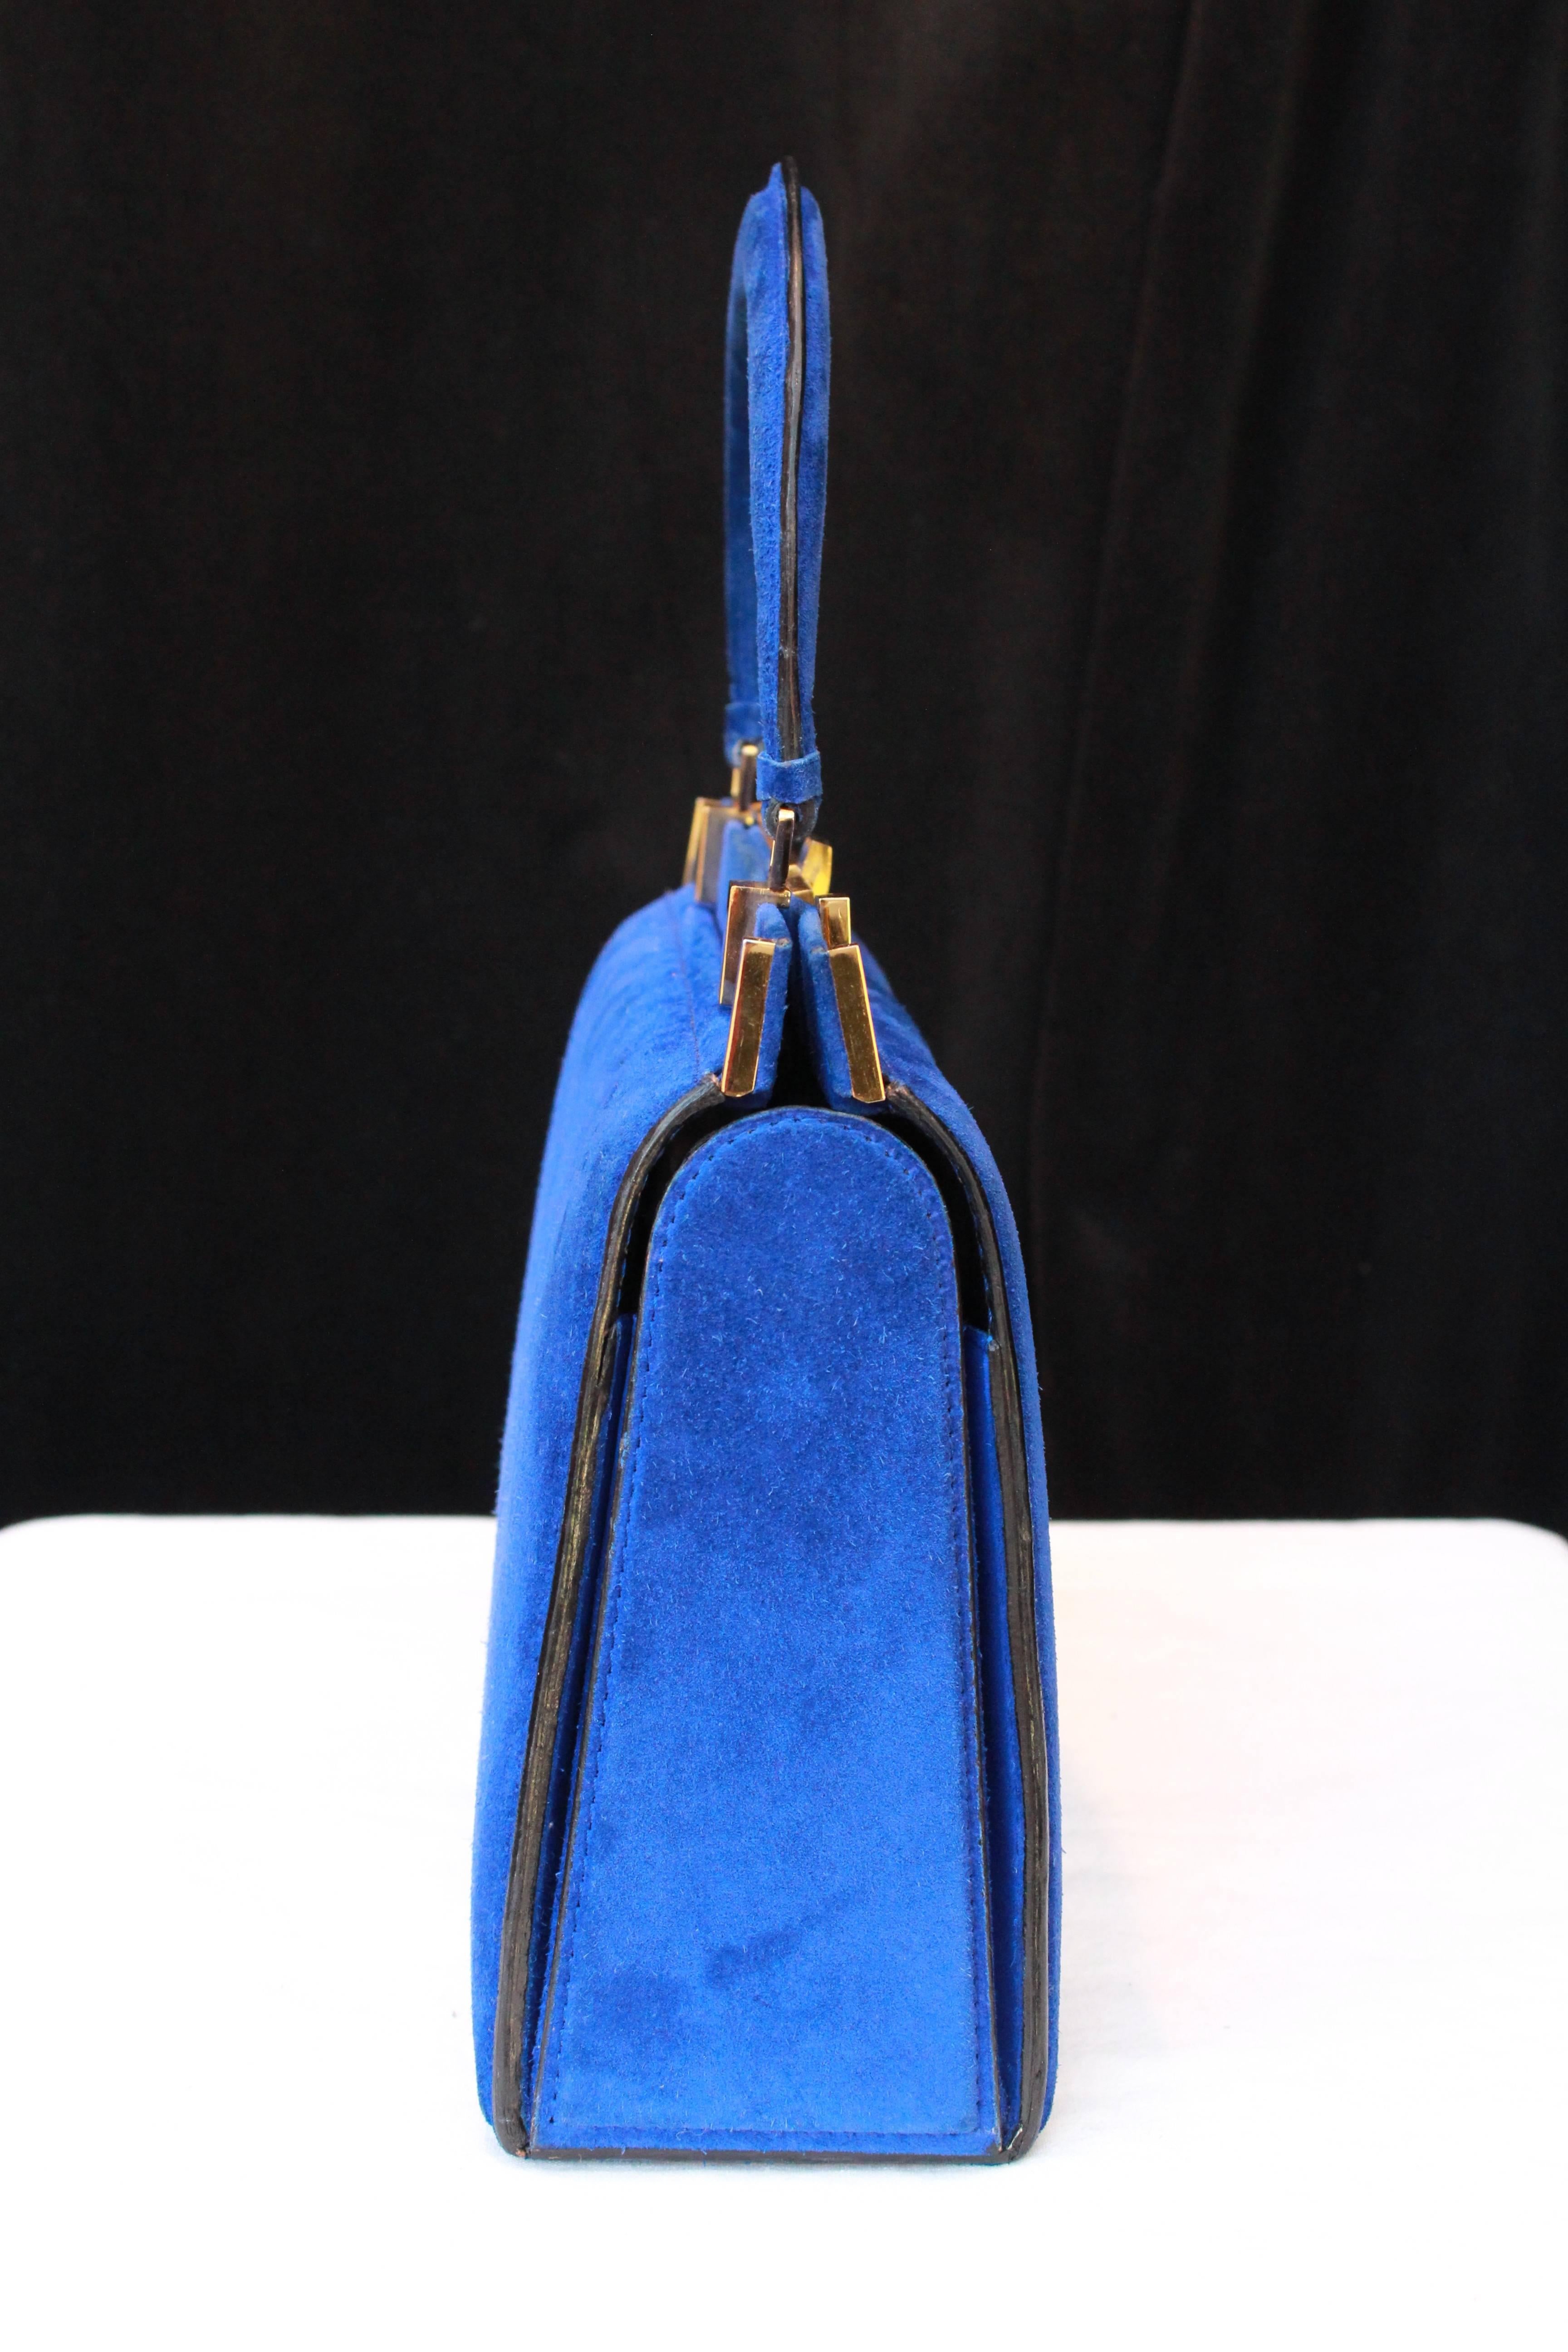 FERNANDE DESGRANGES (Made in France) Trapezoid handbag in electric blue suede and gilded metal hardware. Black leather lining, with two compartments separated by a zipped pocket , one patch pocket with a round snap.

Signed “Genève Paris Nice –